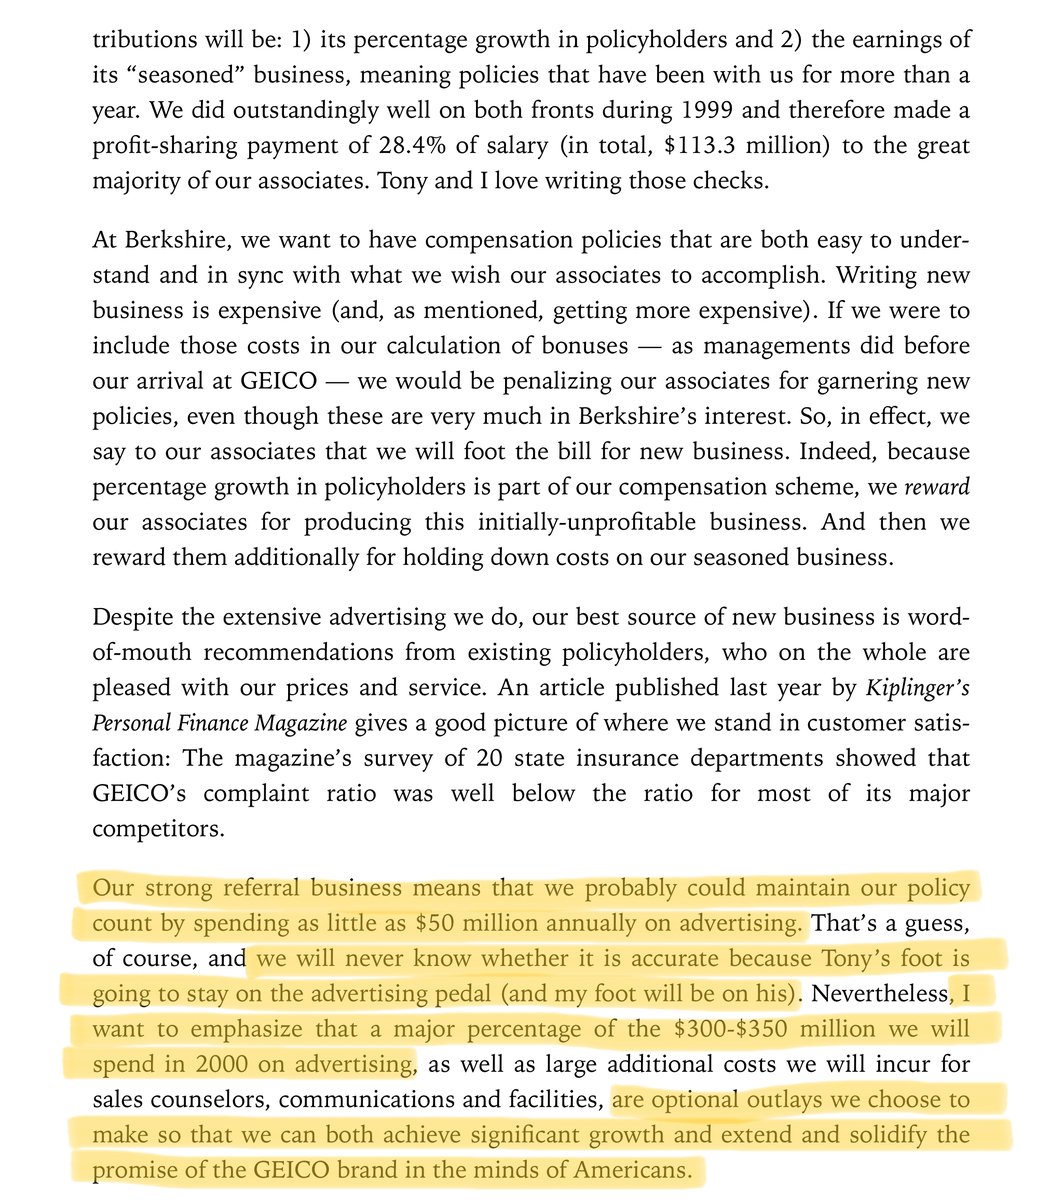 26/I'll leave you with some references containing more insights on LTV and CAC.LTV and CAC may seem like newfangled terms, but Buffett was talking about this trade-off way back in 1999! https://www.berkshirehathaway.com/letters/1999htm.html